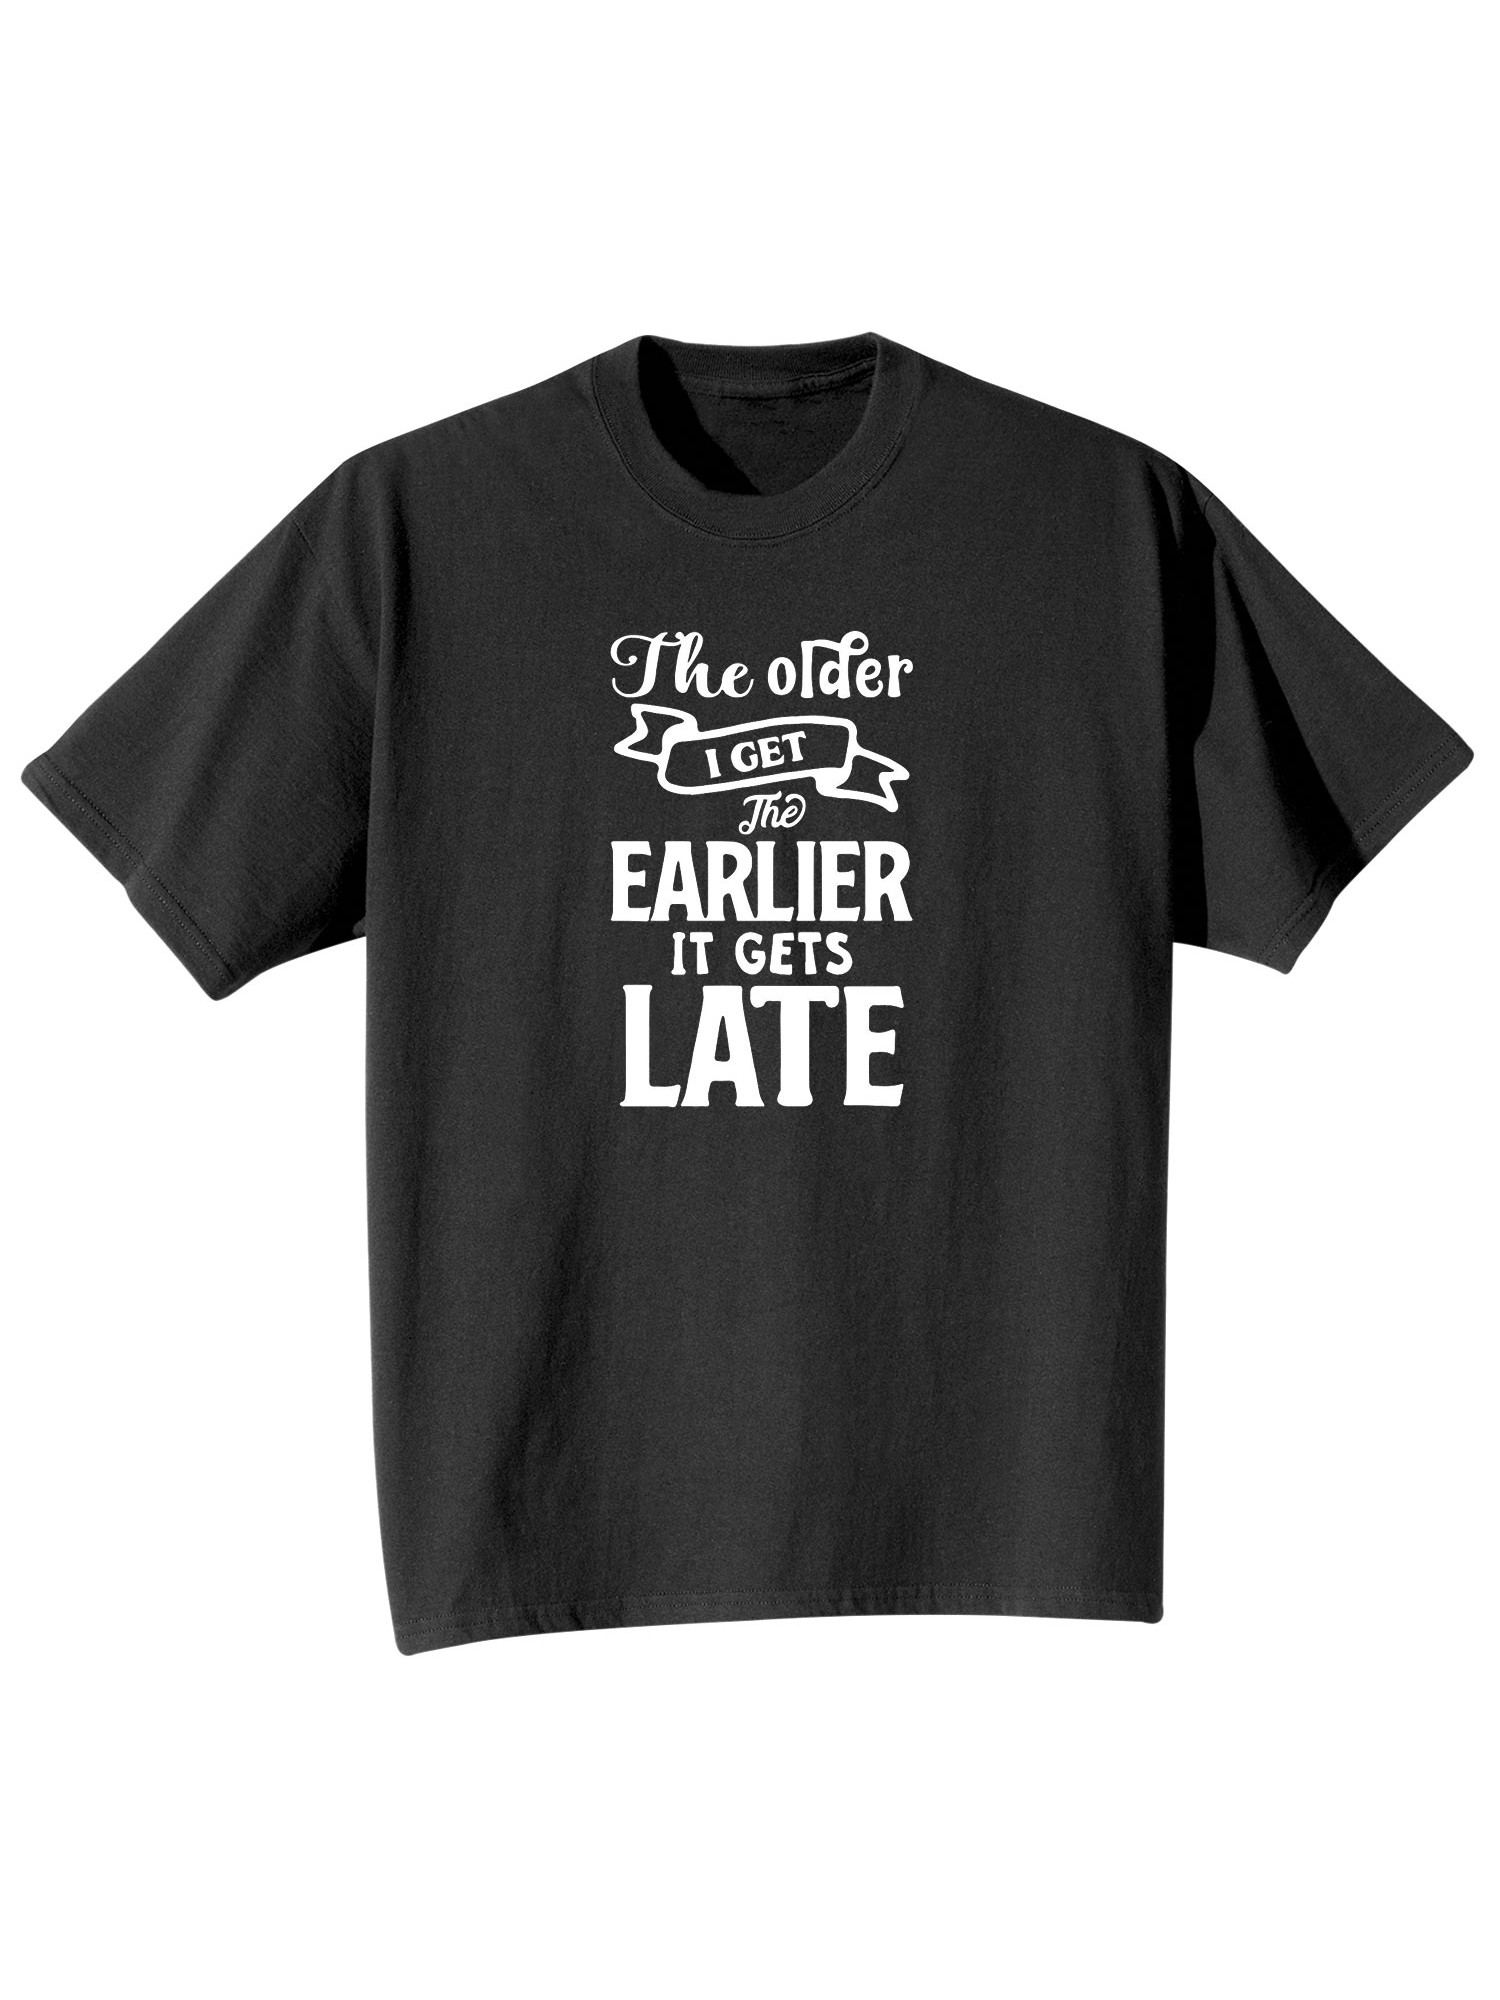 Product image for The Older I Get, The Earlier It Gets Late T-Shirt or Sweatshirt